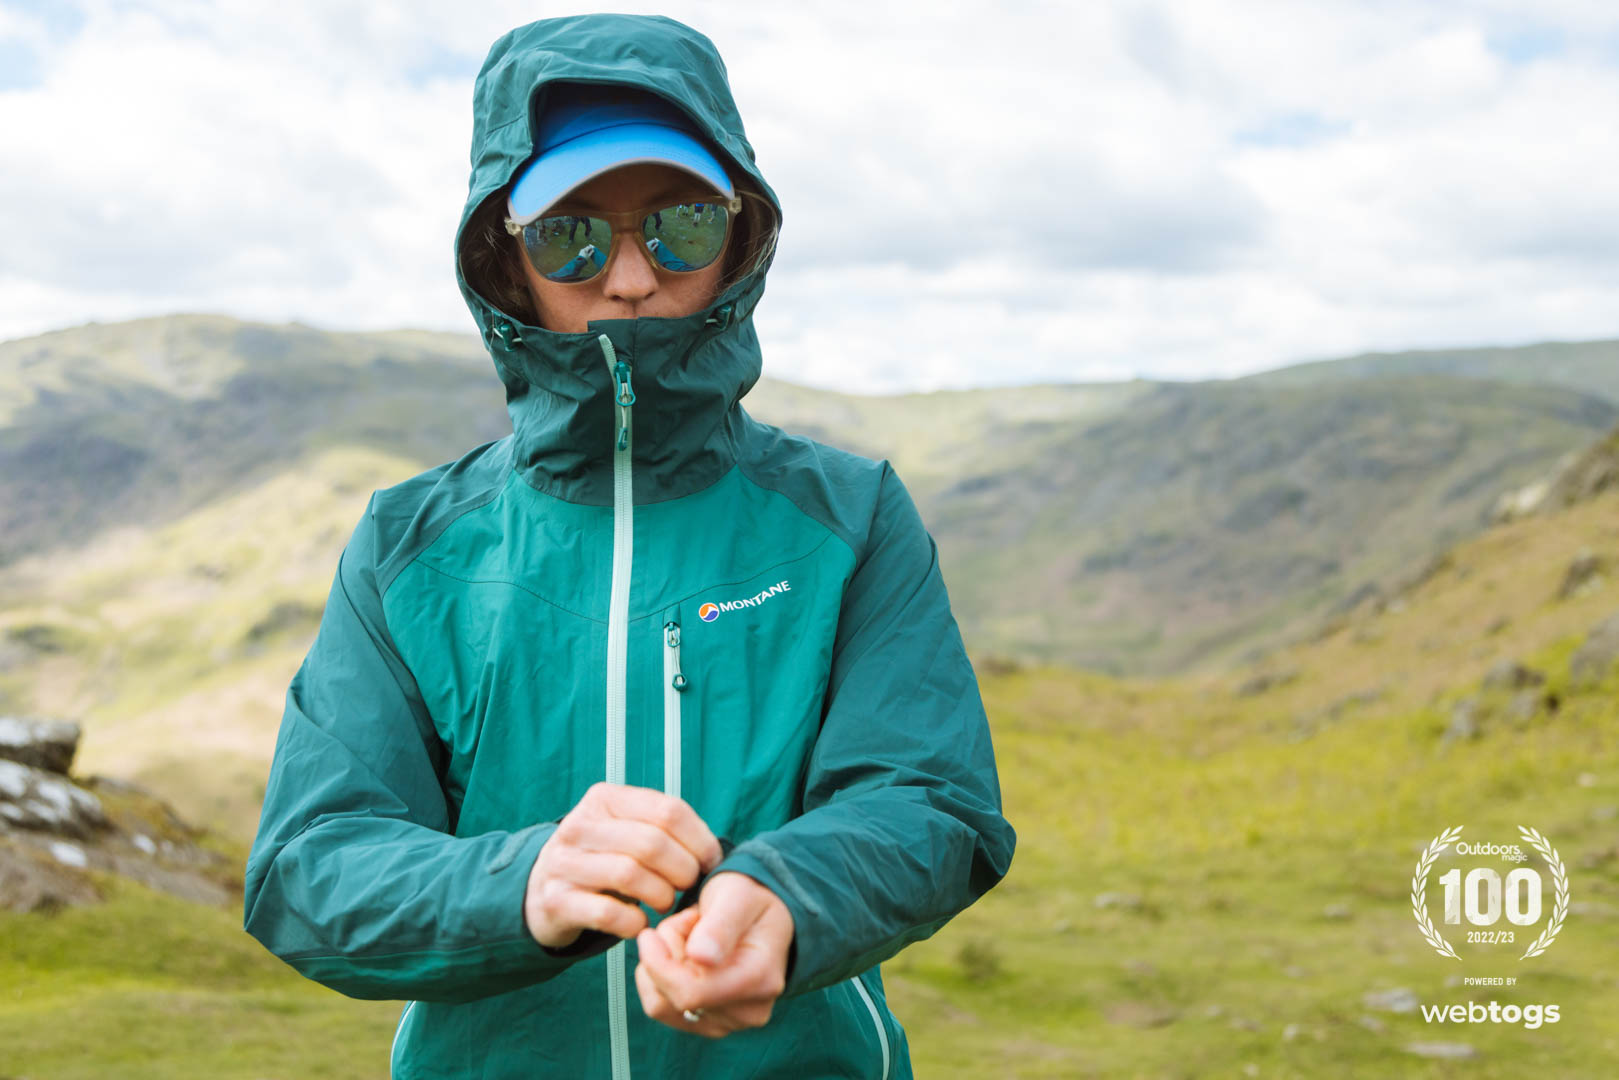 Montane Spine Jacket review